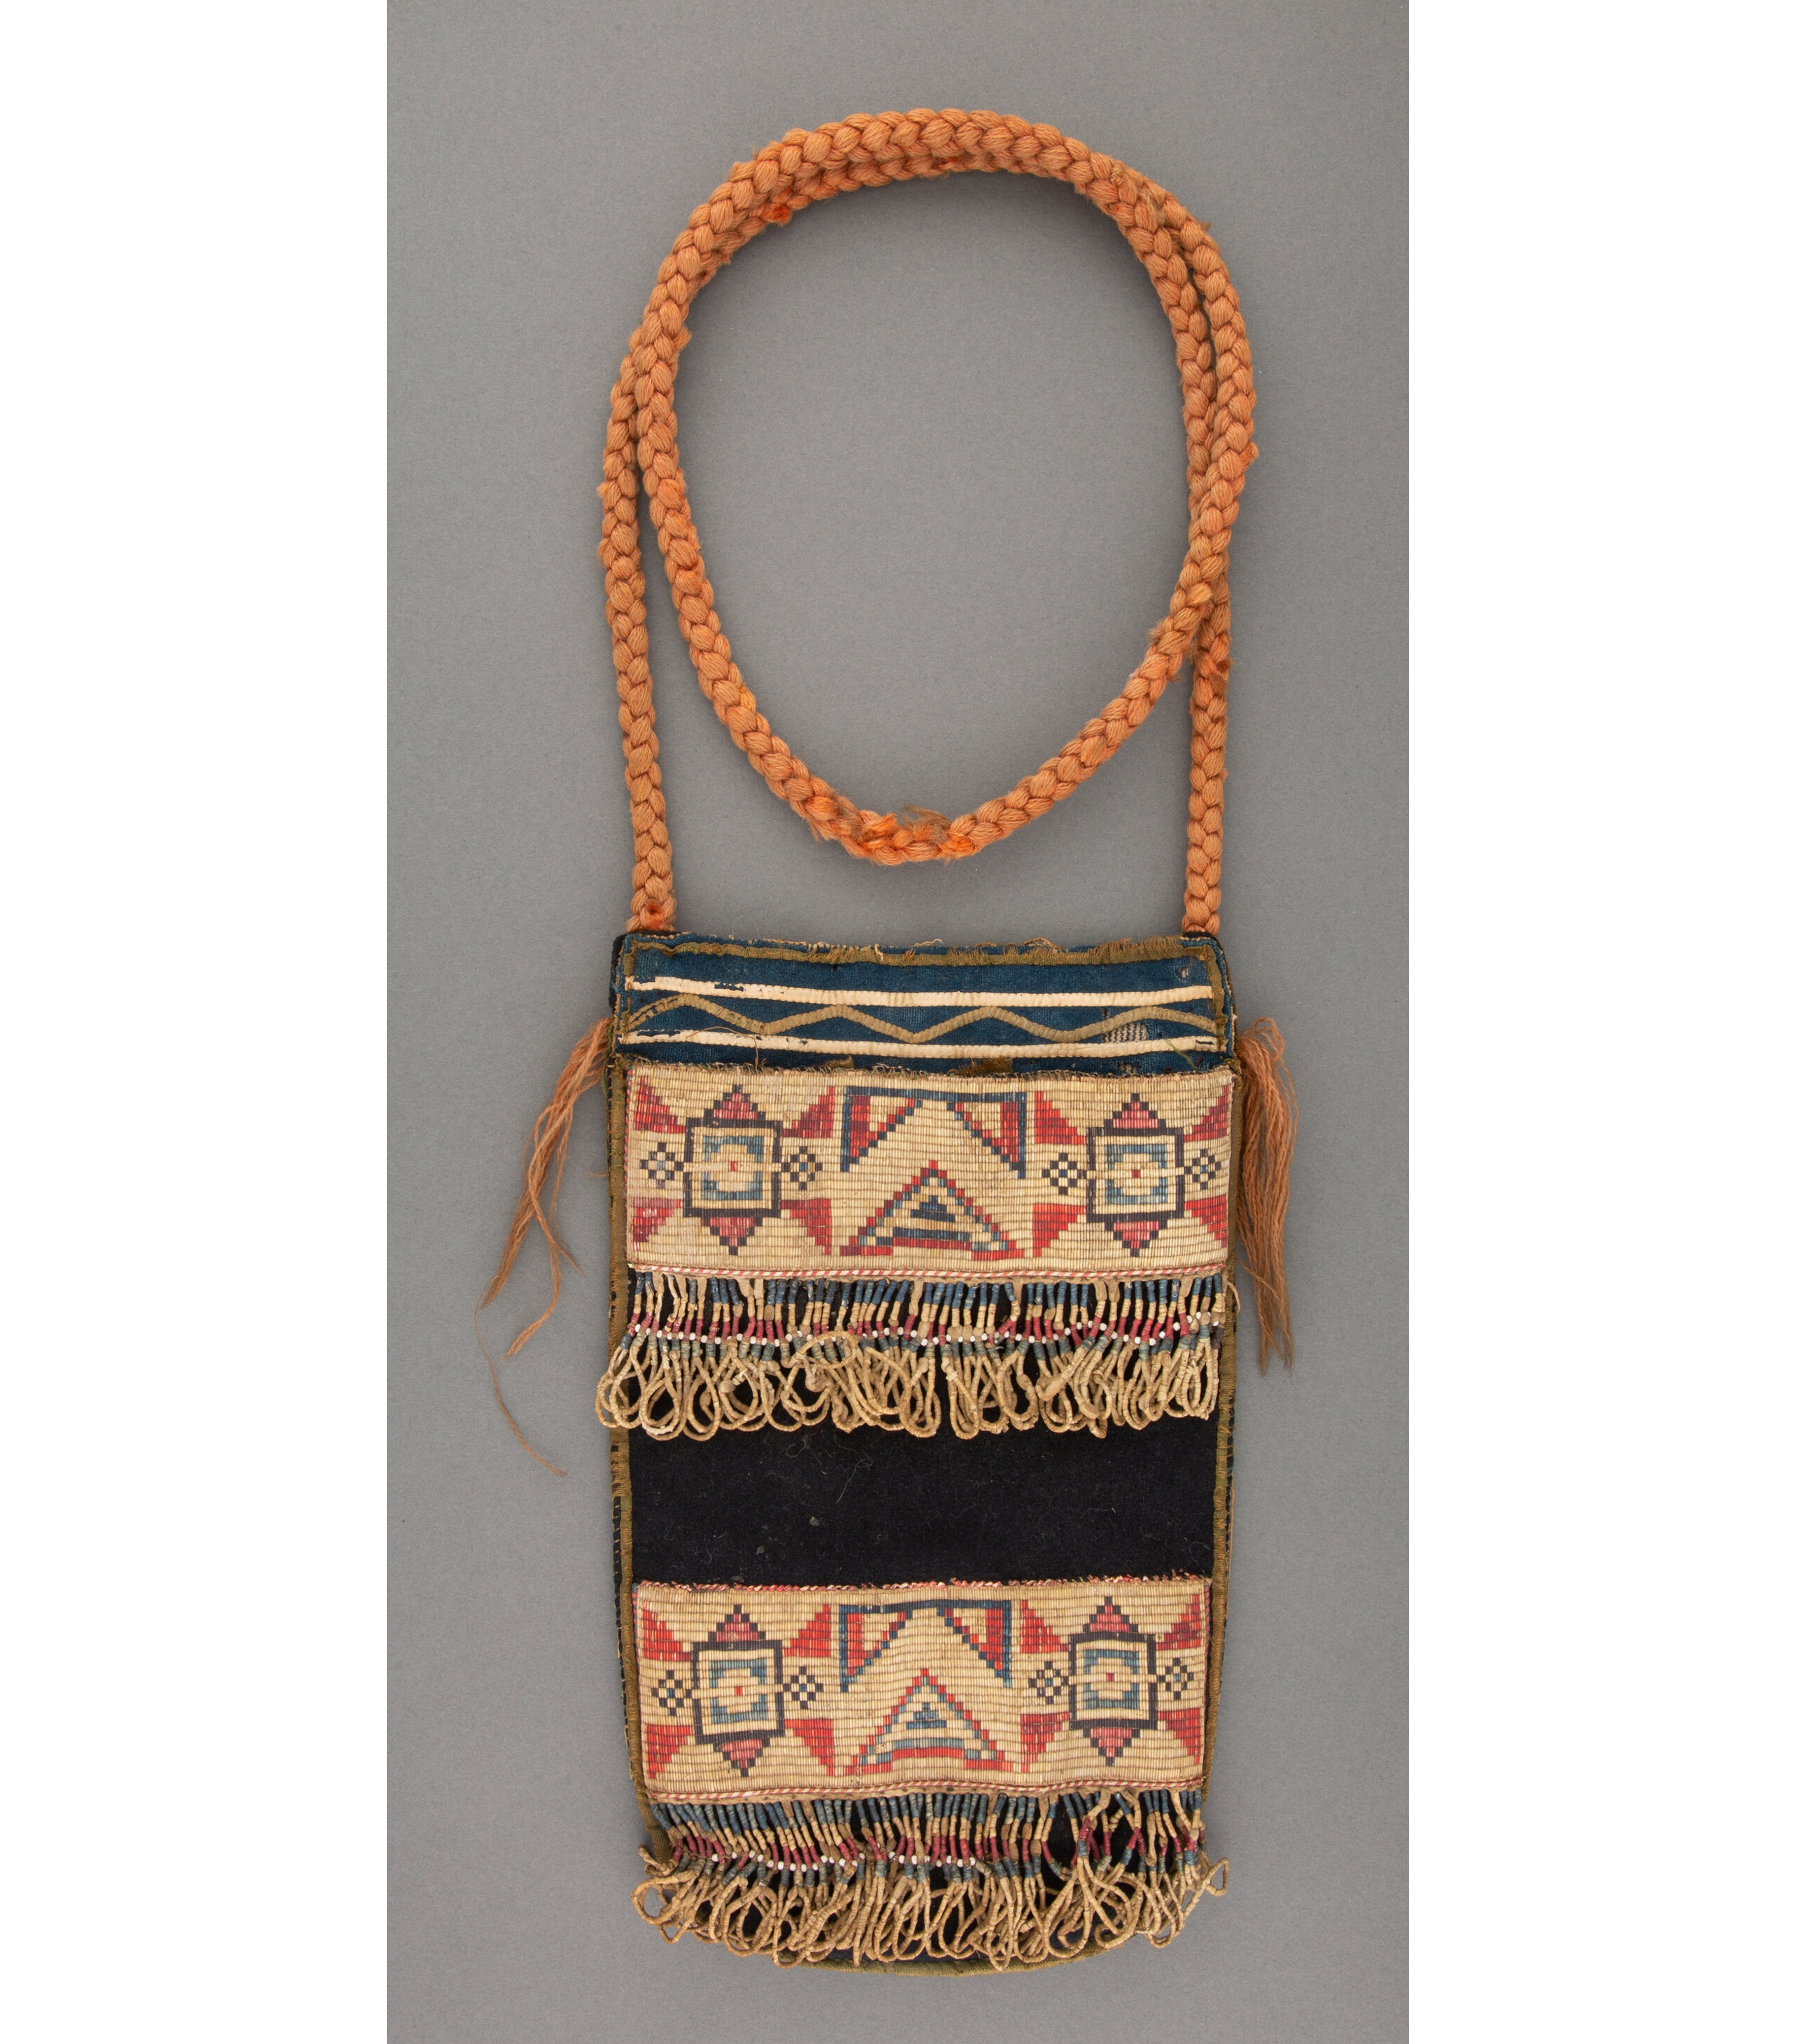 Cree quilled hide pouch, est. $40,000-$60,000. Image courtesy of Heritage Auctions